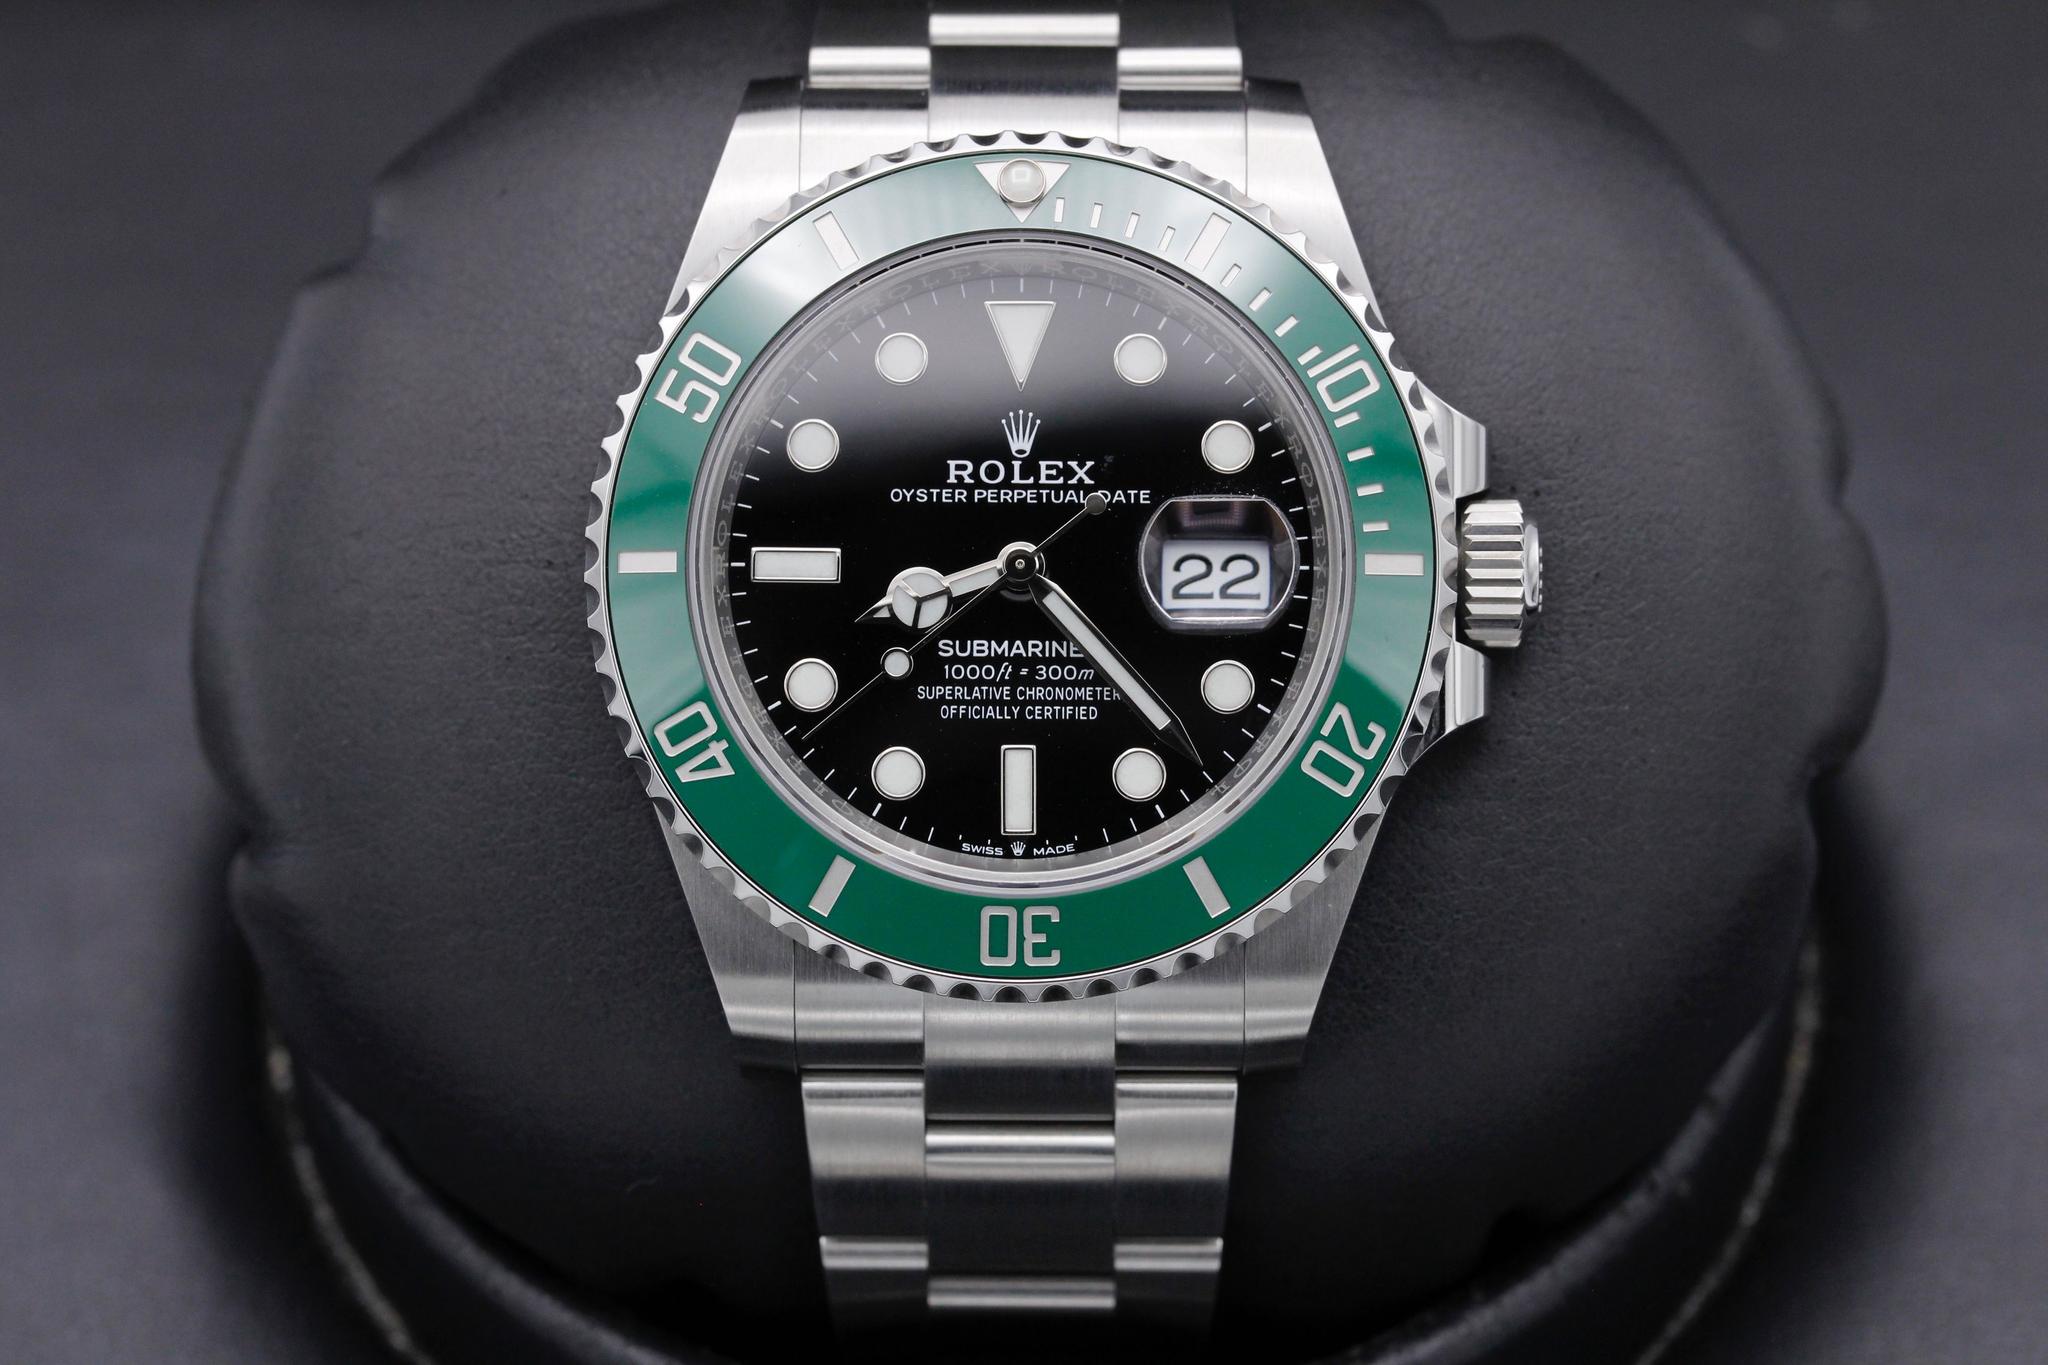 Rolex 126610 watches for sale